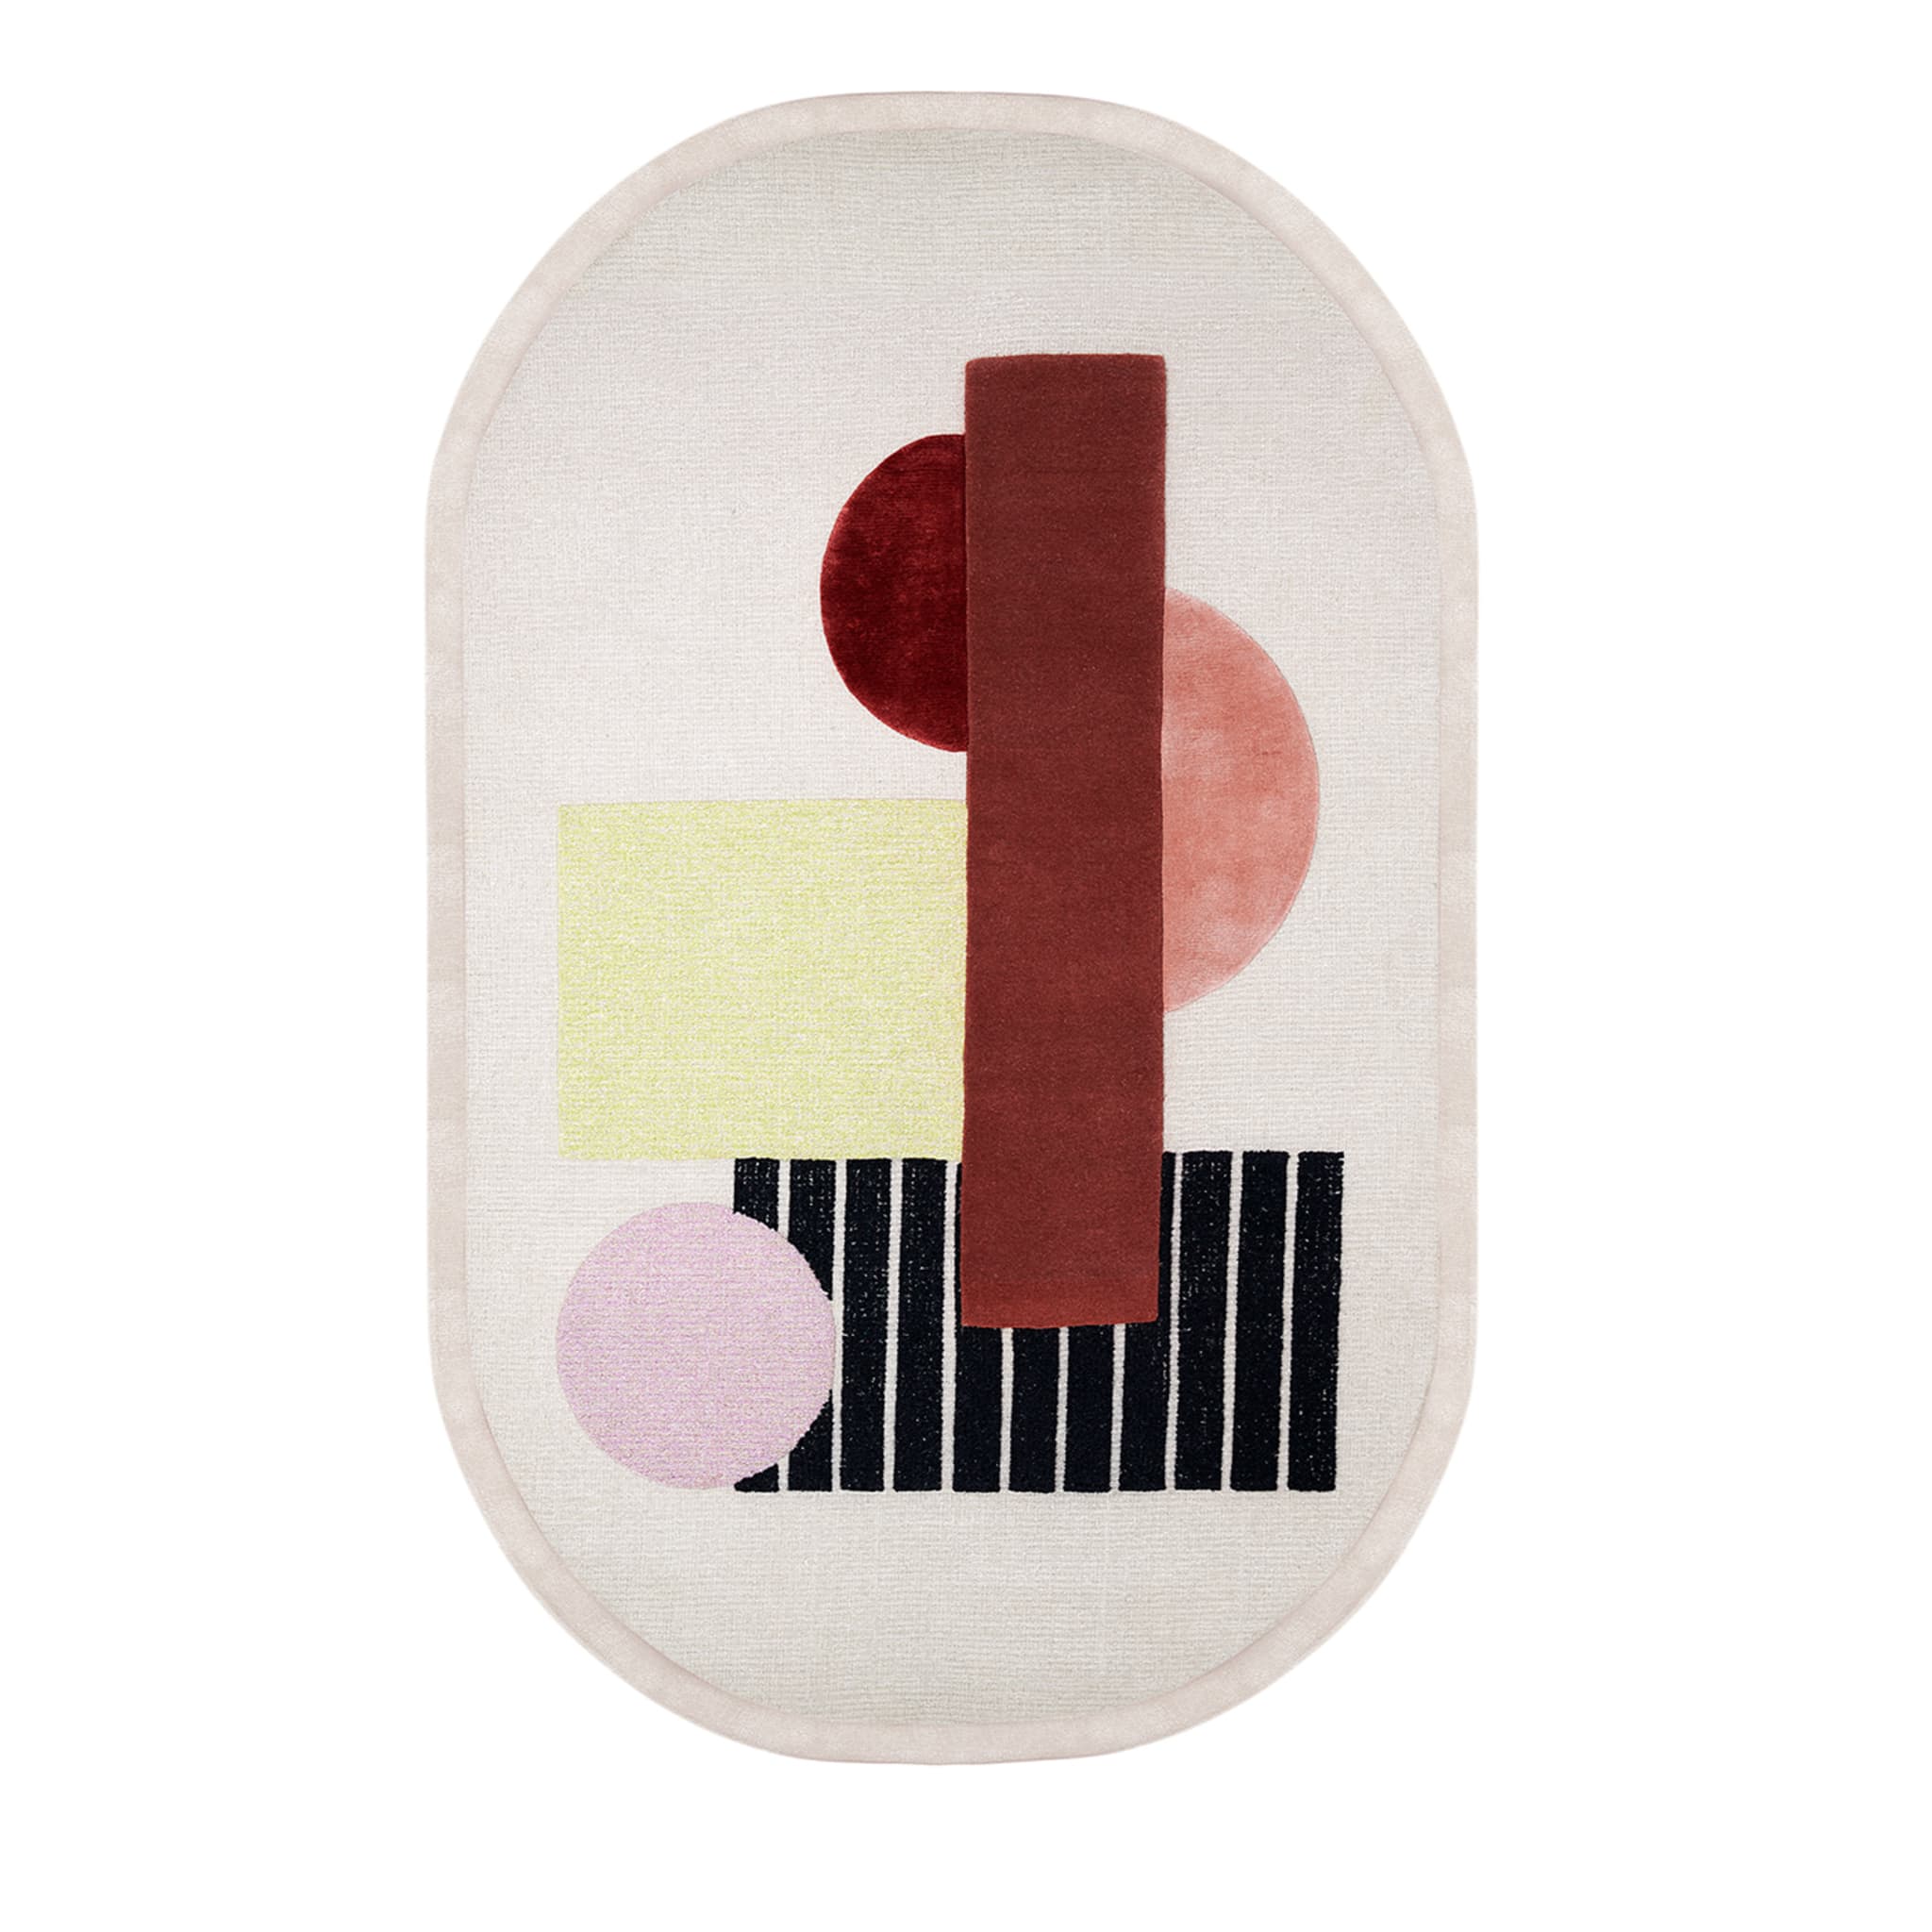 AROUND COLORS RUG BROWN BY PAOLA PASTORINI - Main view